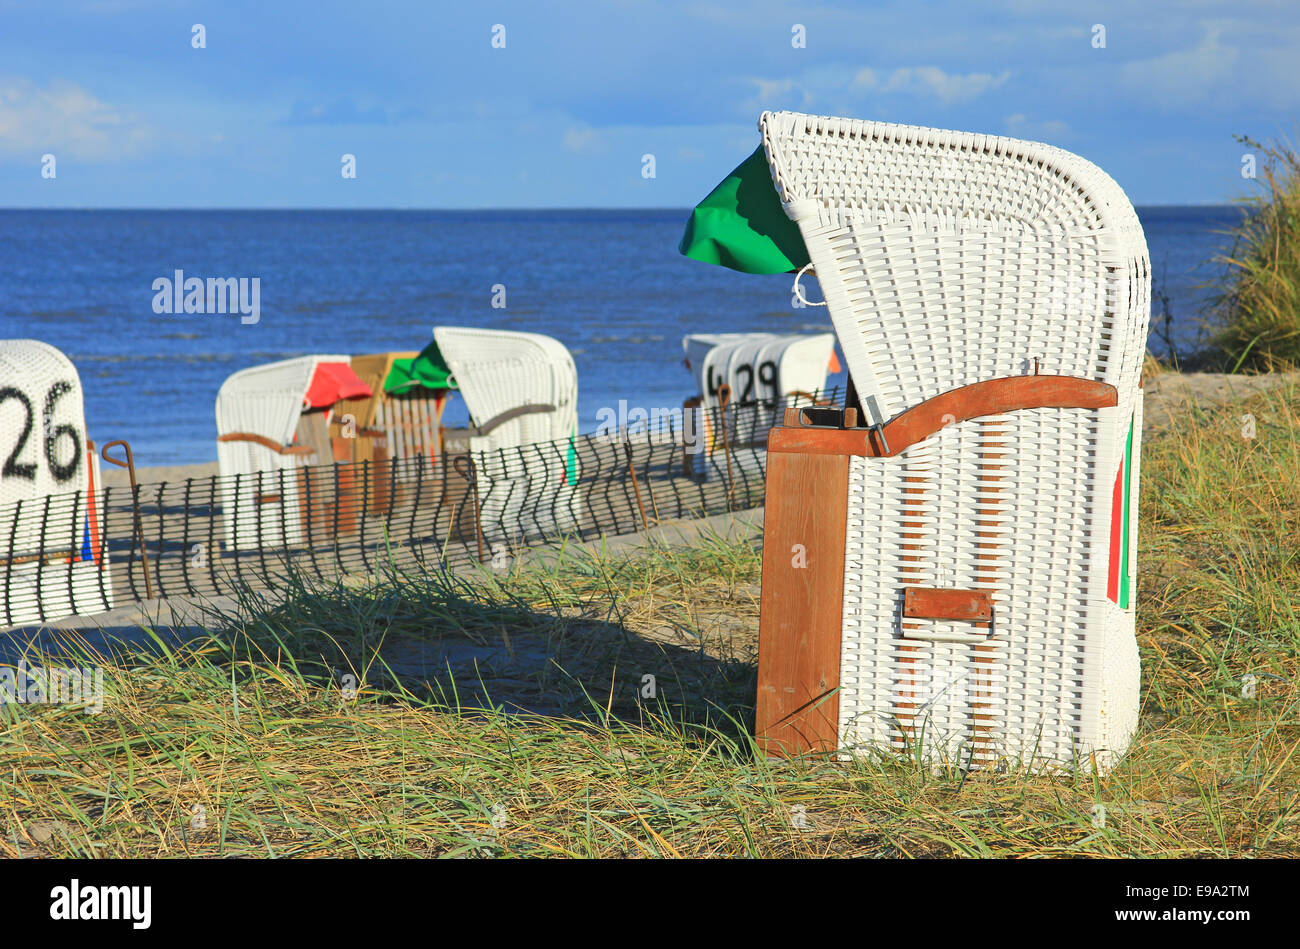 Beach chairs on the North Sea, Germany Stock Photo